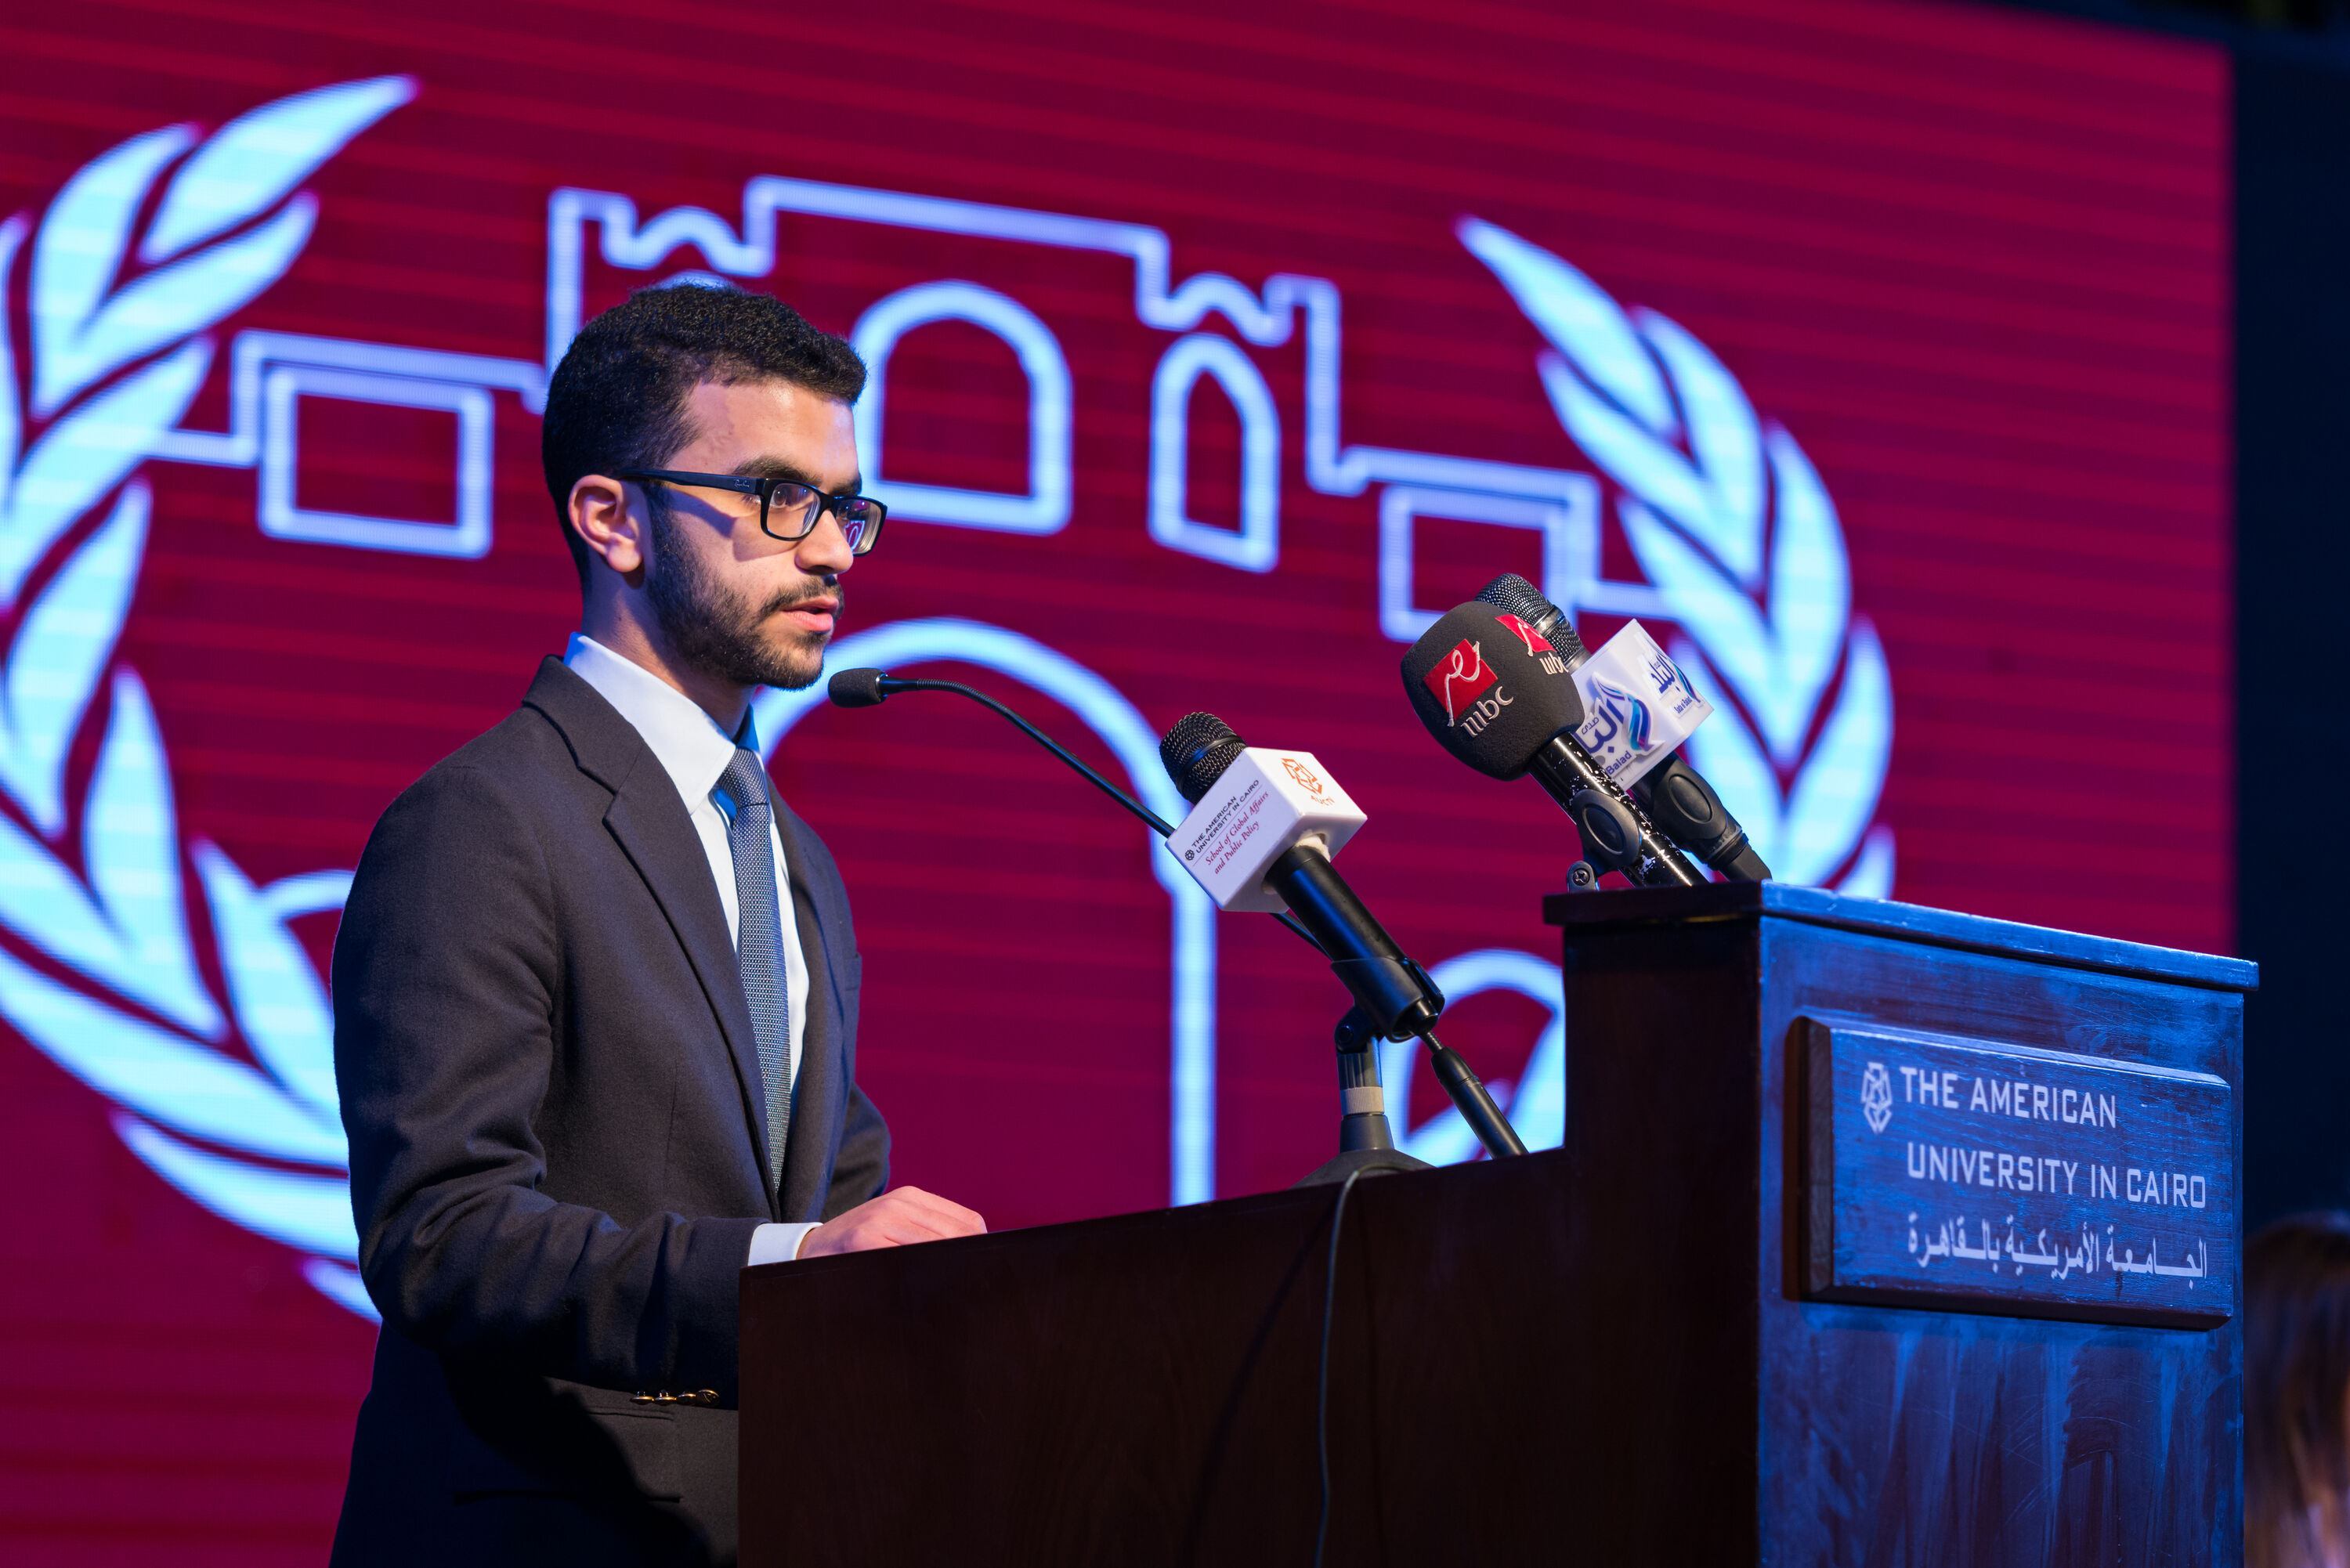 Dual Degree Political Science and International Human Law image of student giving a speech on a podium in a political conference